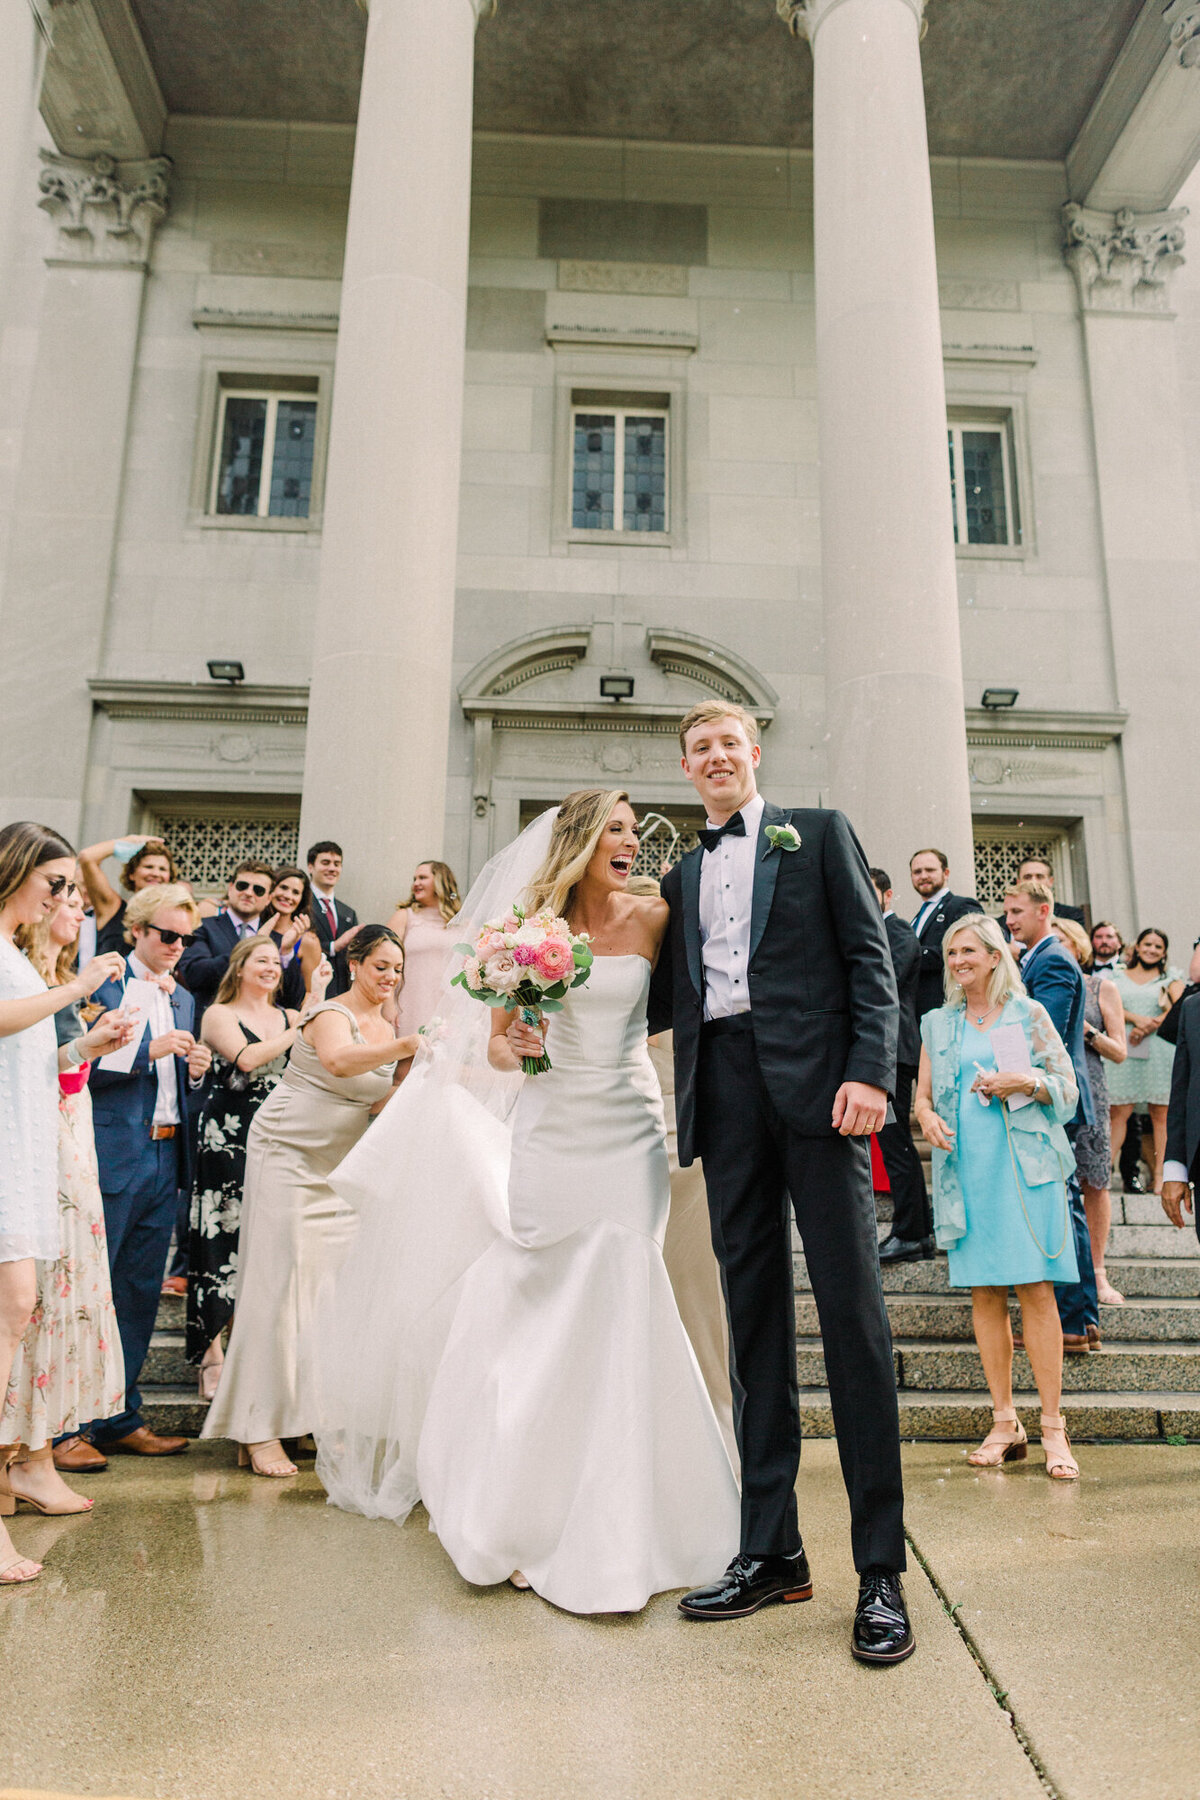 Newlyweds walk outside of the church as their loved ones congratulate them